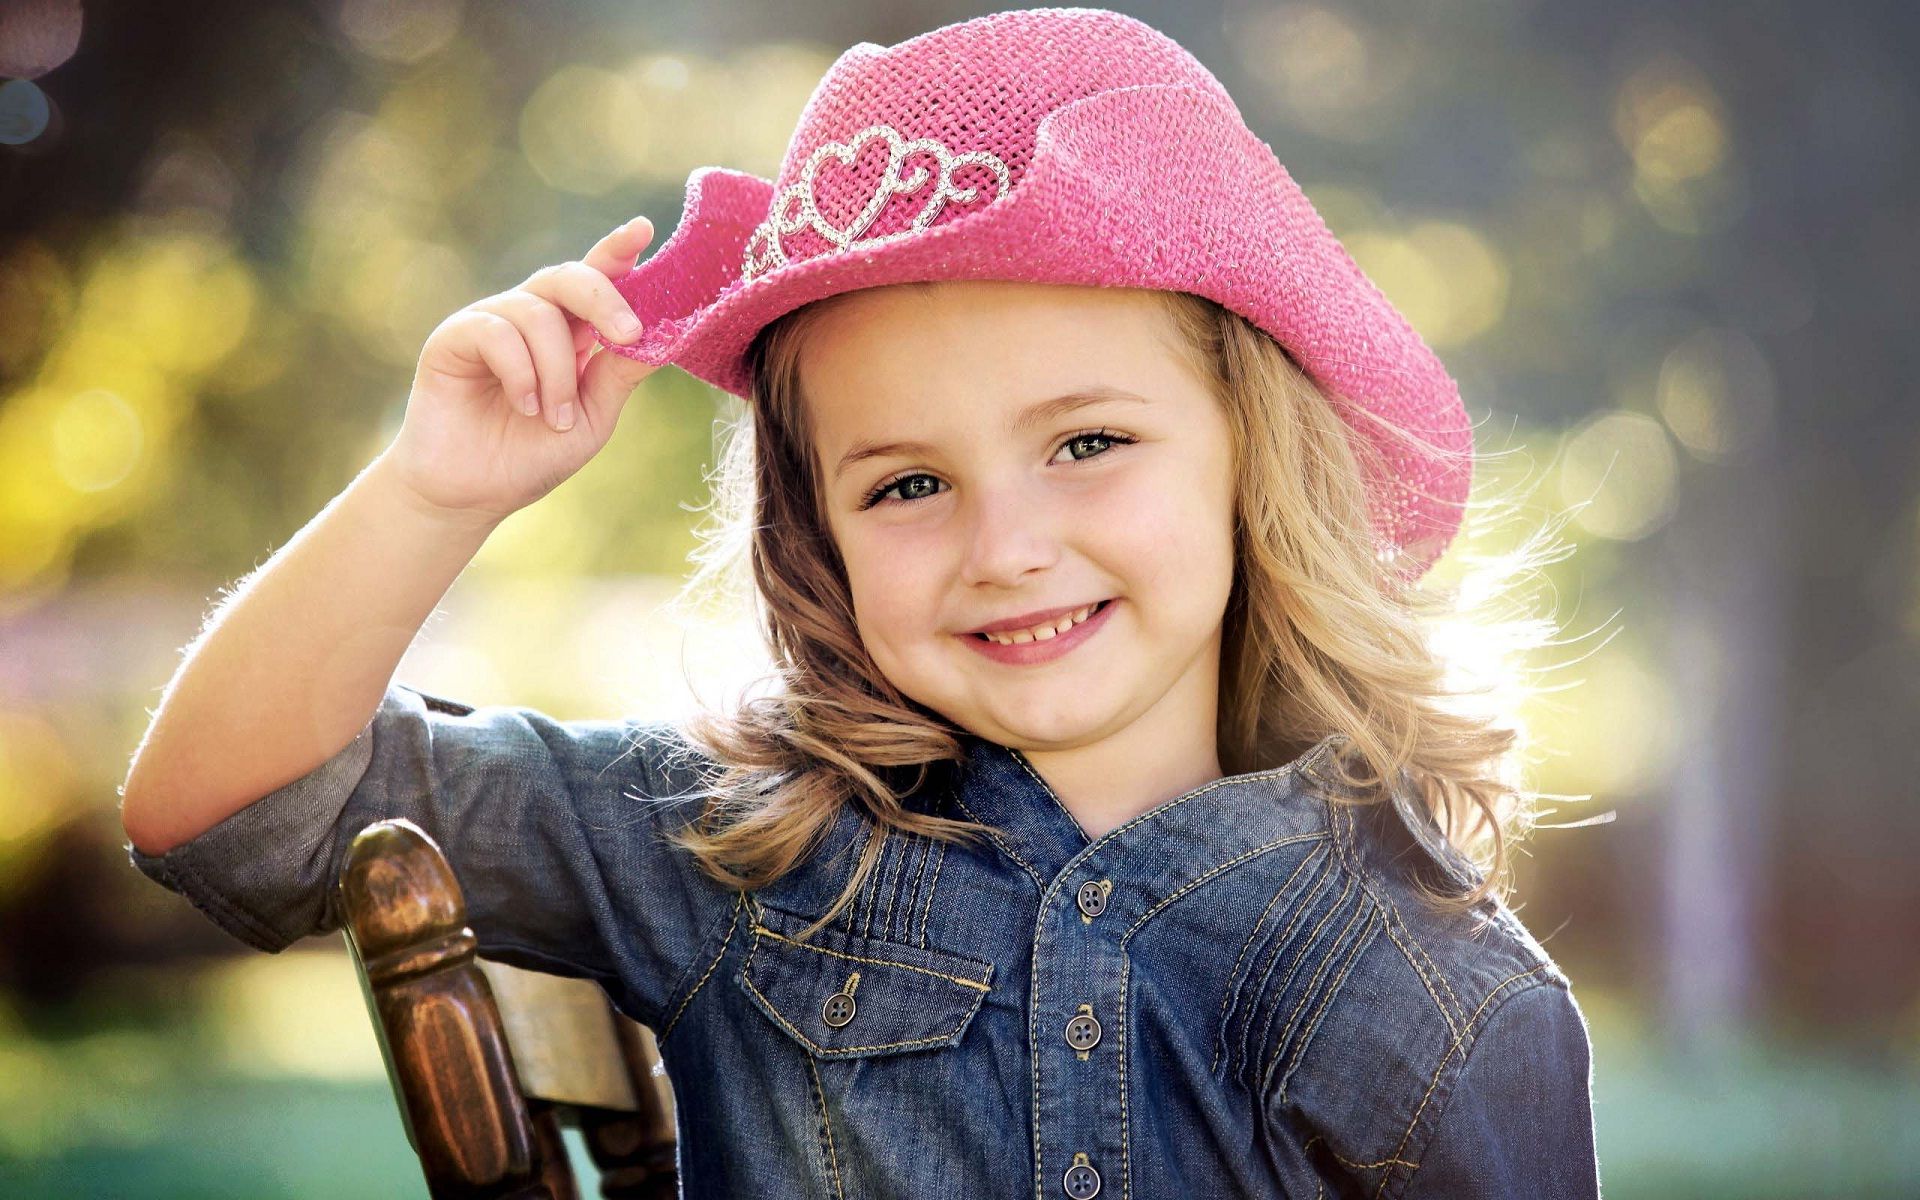 Stylish cute baby girl beautiful smiling face hd wallpapers | Only ...